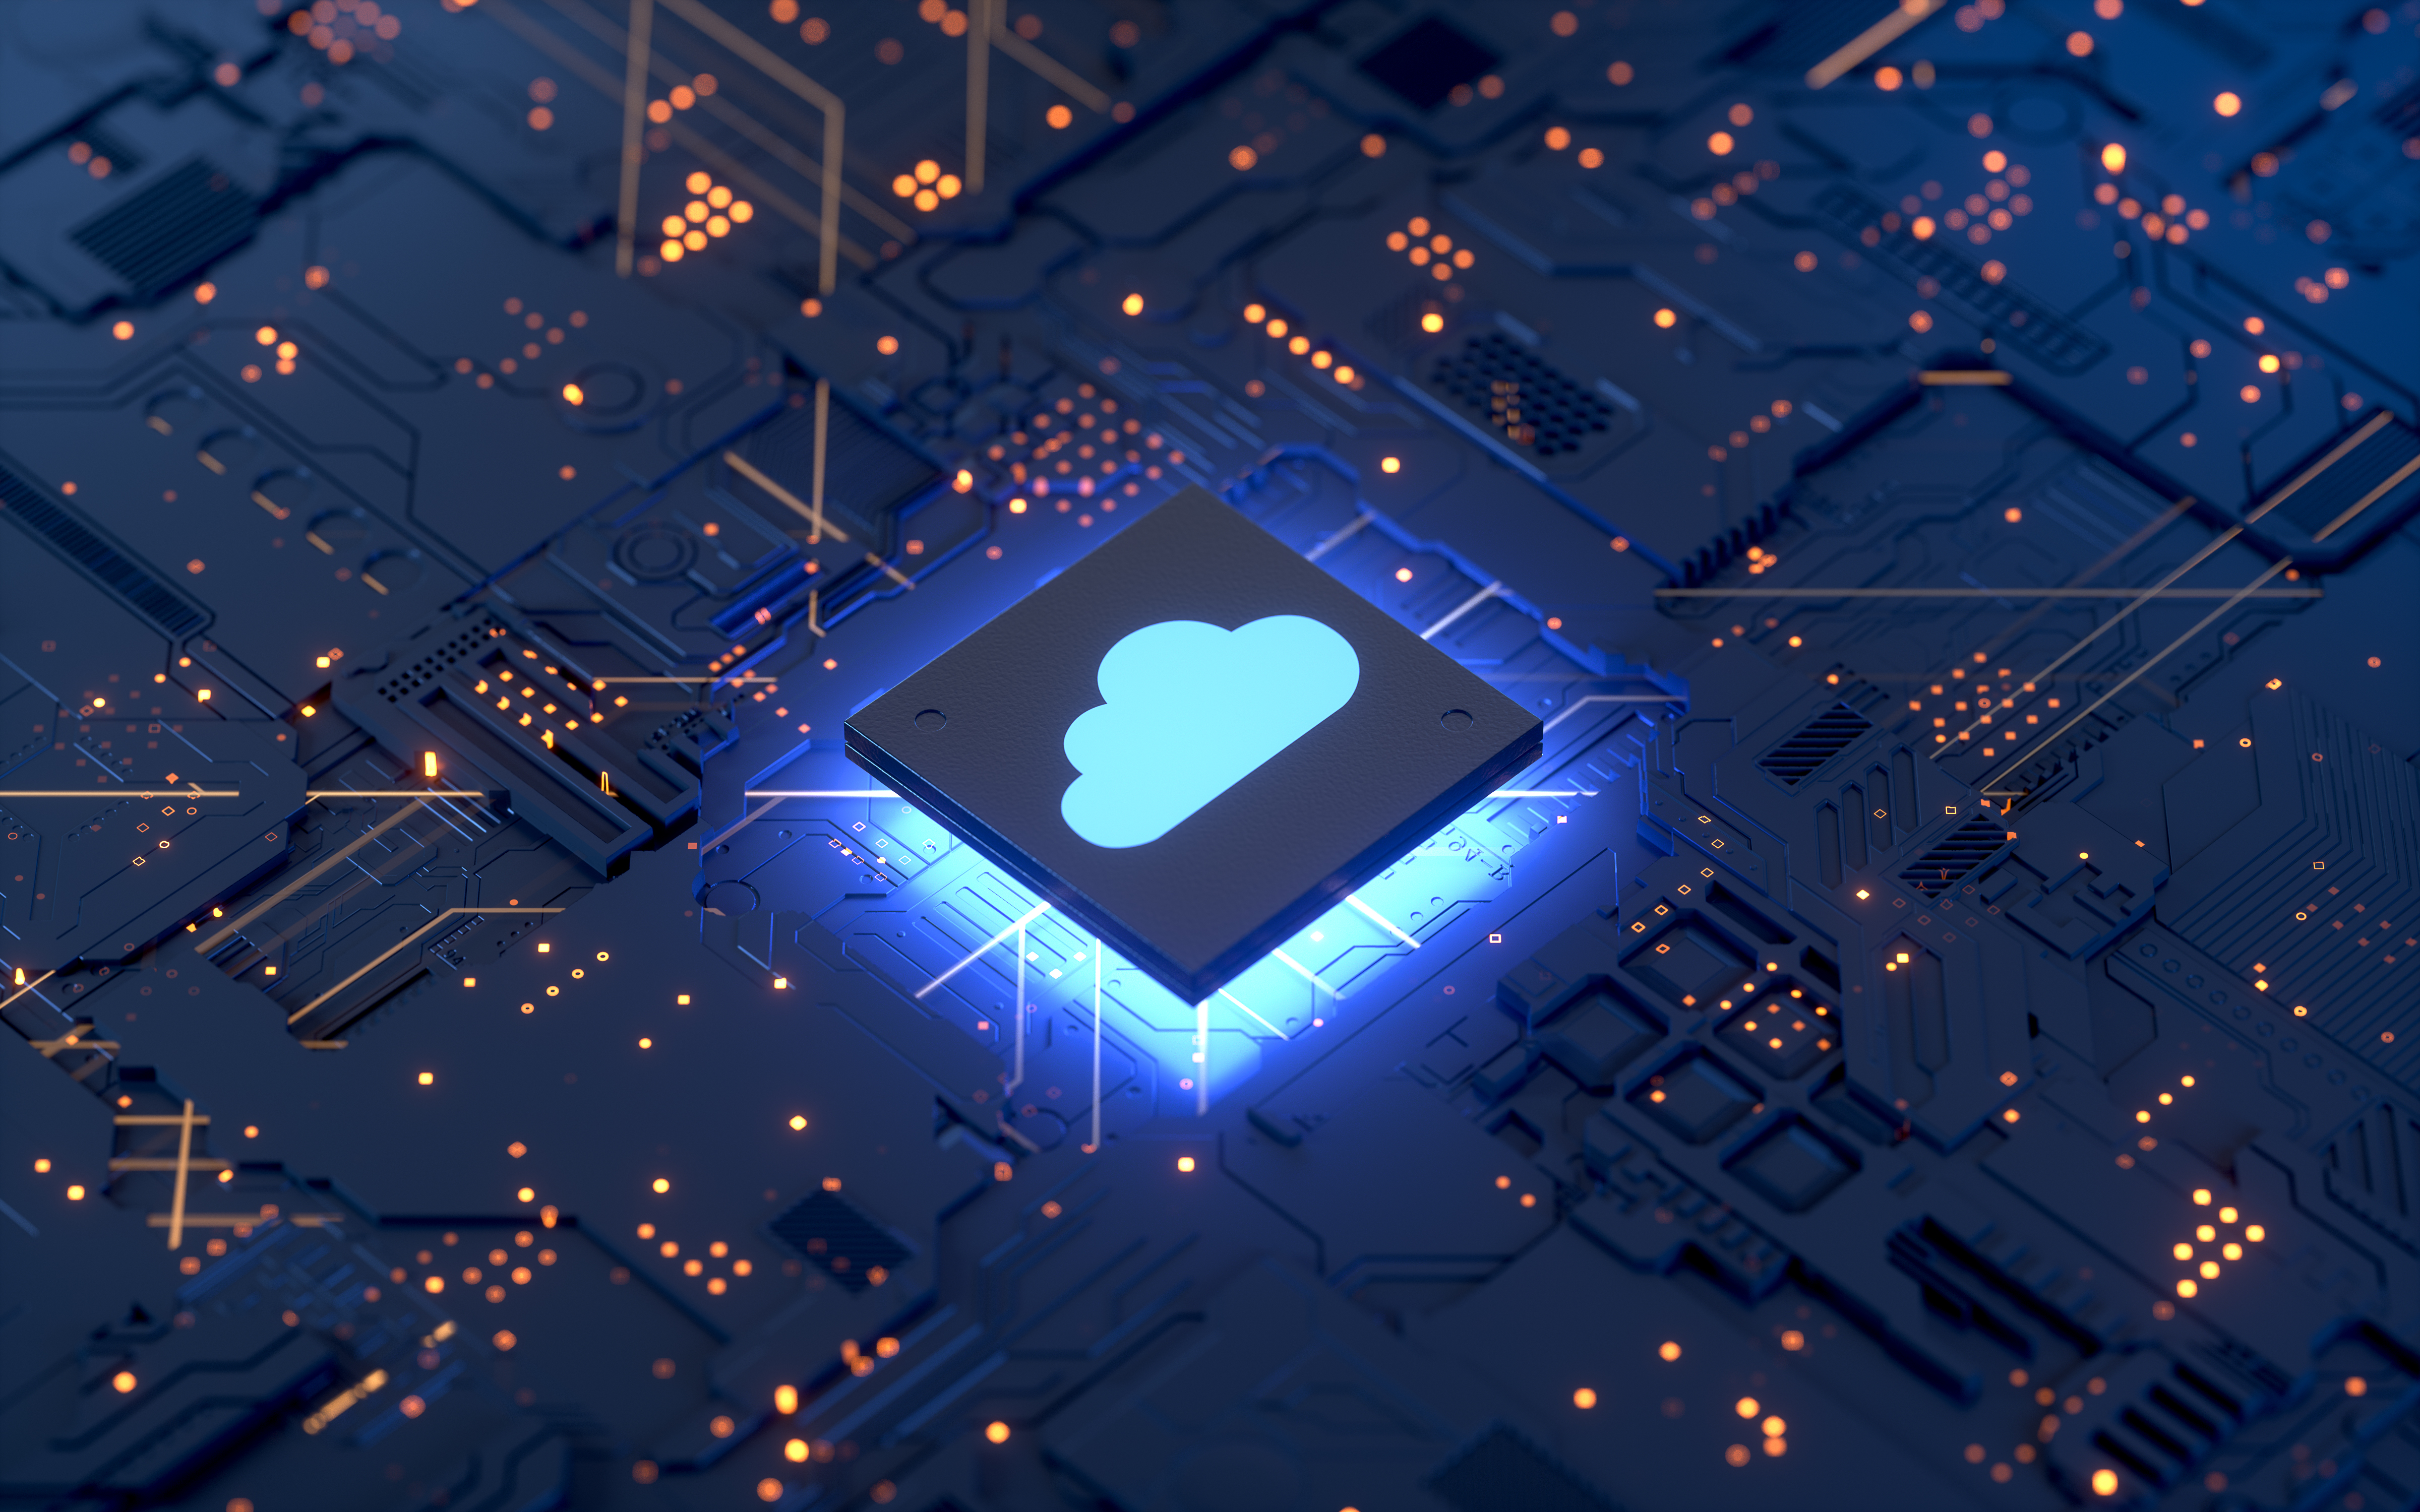 Protecting your data across Cloud applications